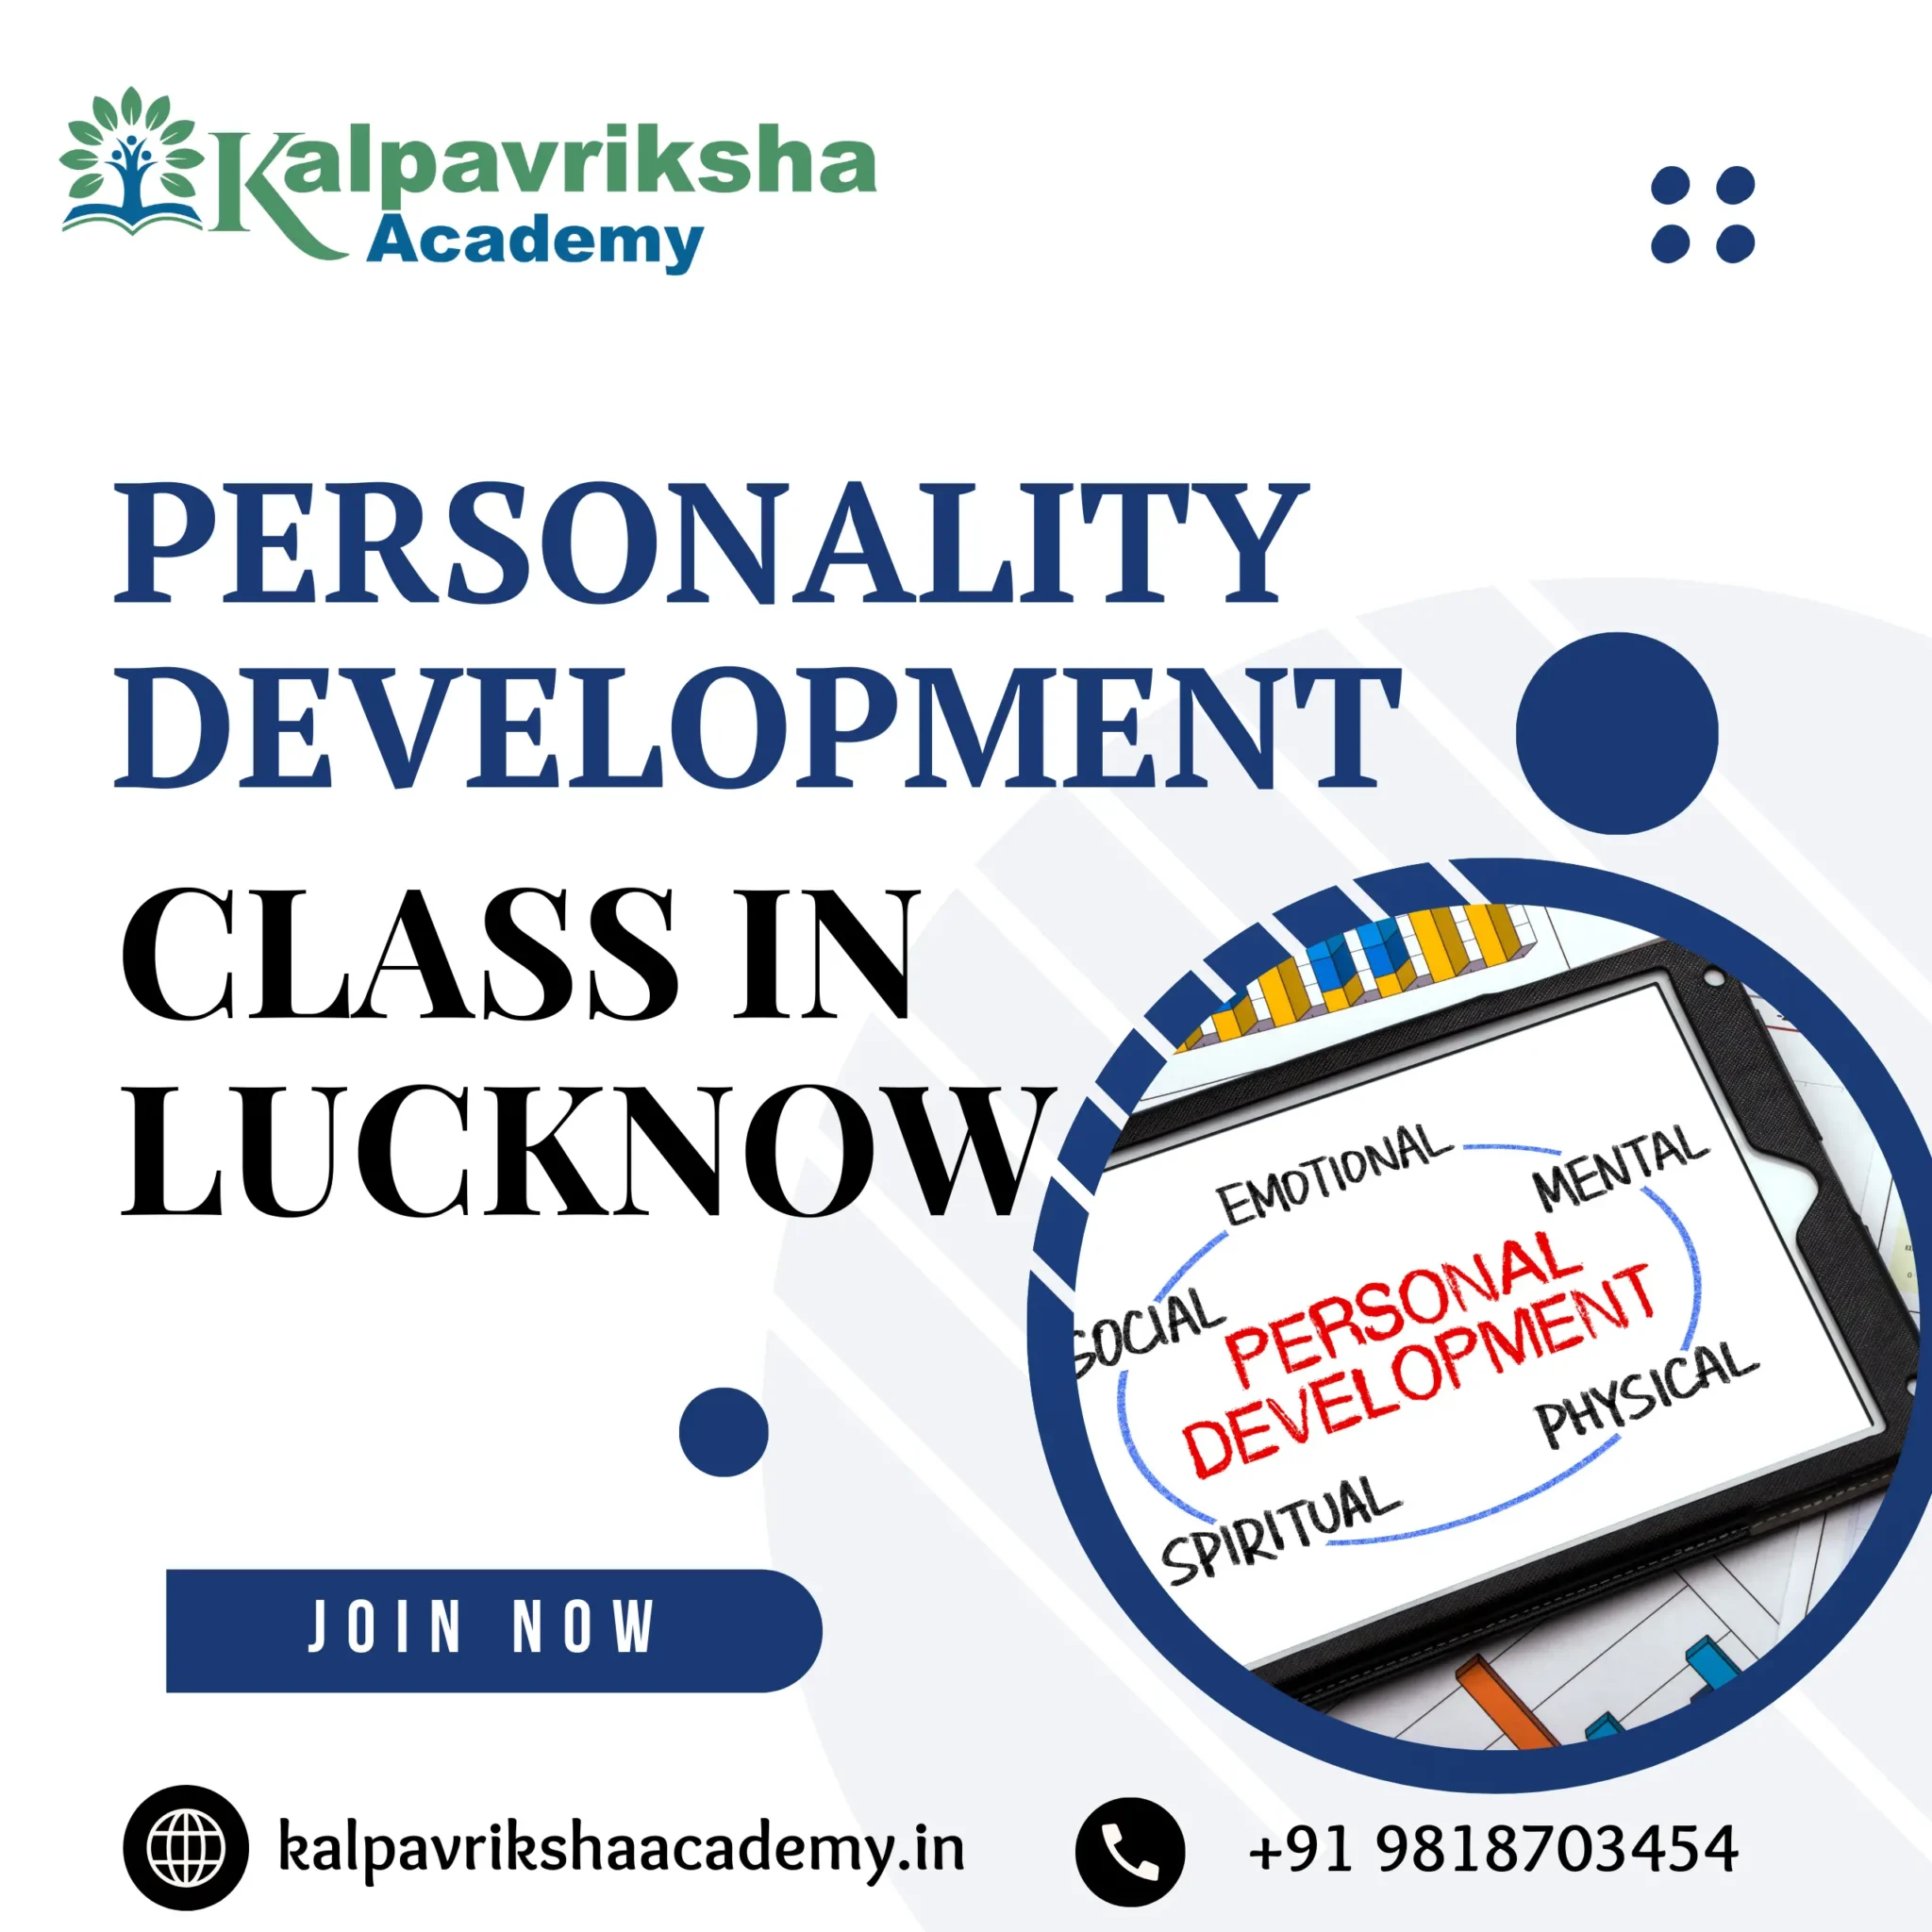 Online Personality Development Classes in Lucknow